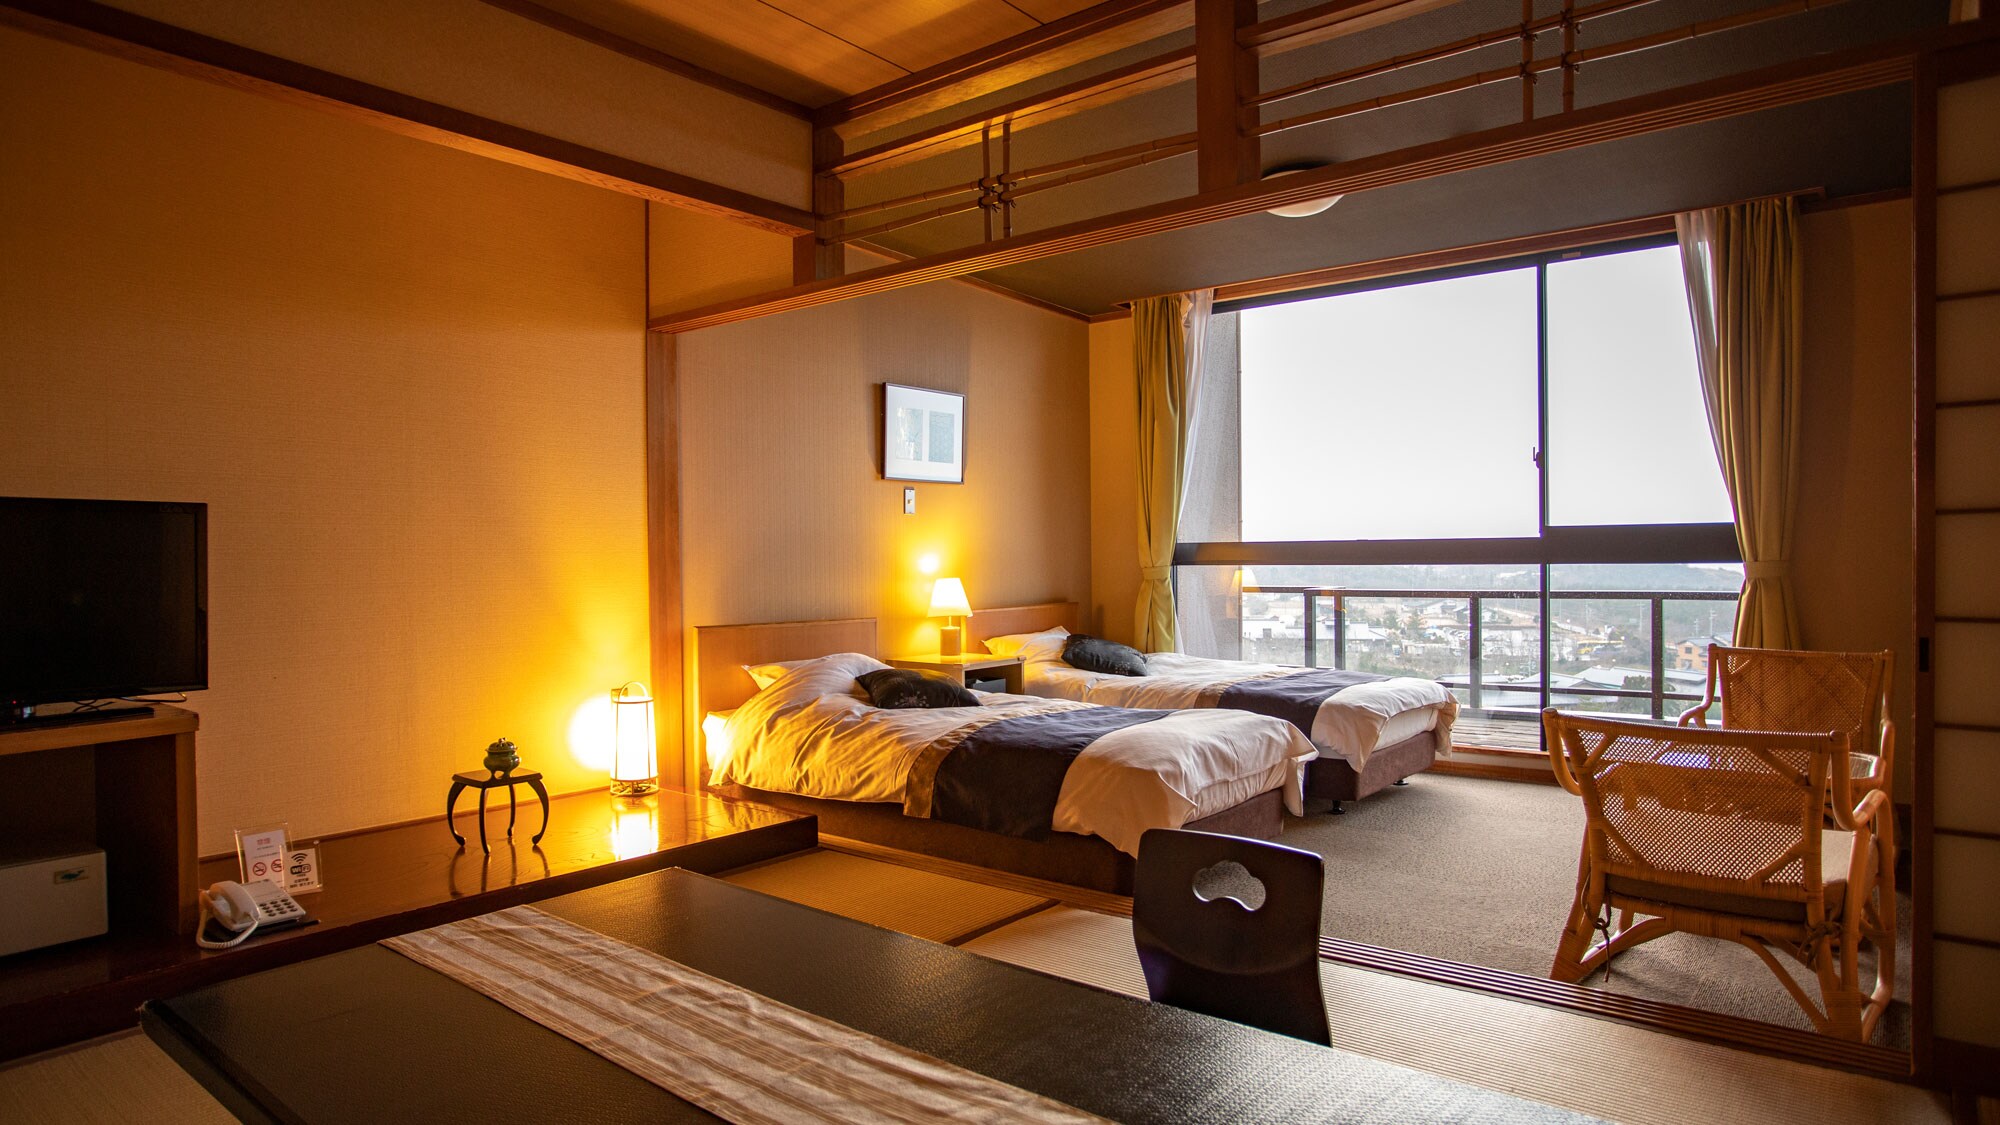 Good points of hotels and inns. From the large windows, you can see the streets of Hamazume.